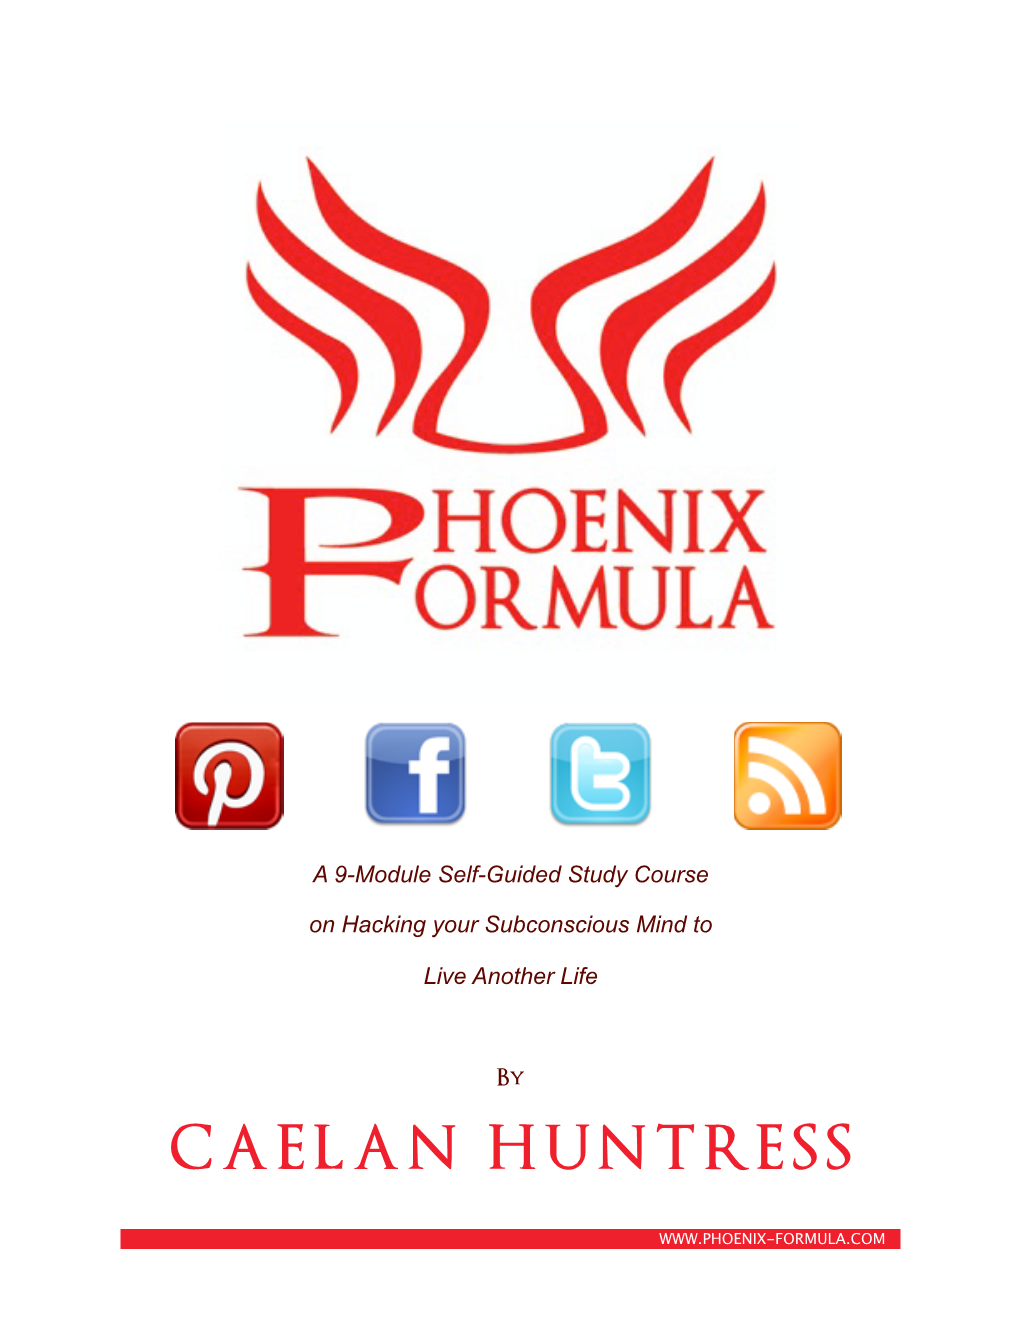 The Phoenix Formula to Help Others Maximize Their Own Potential, and Live the Life They Were Meant to Live